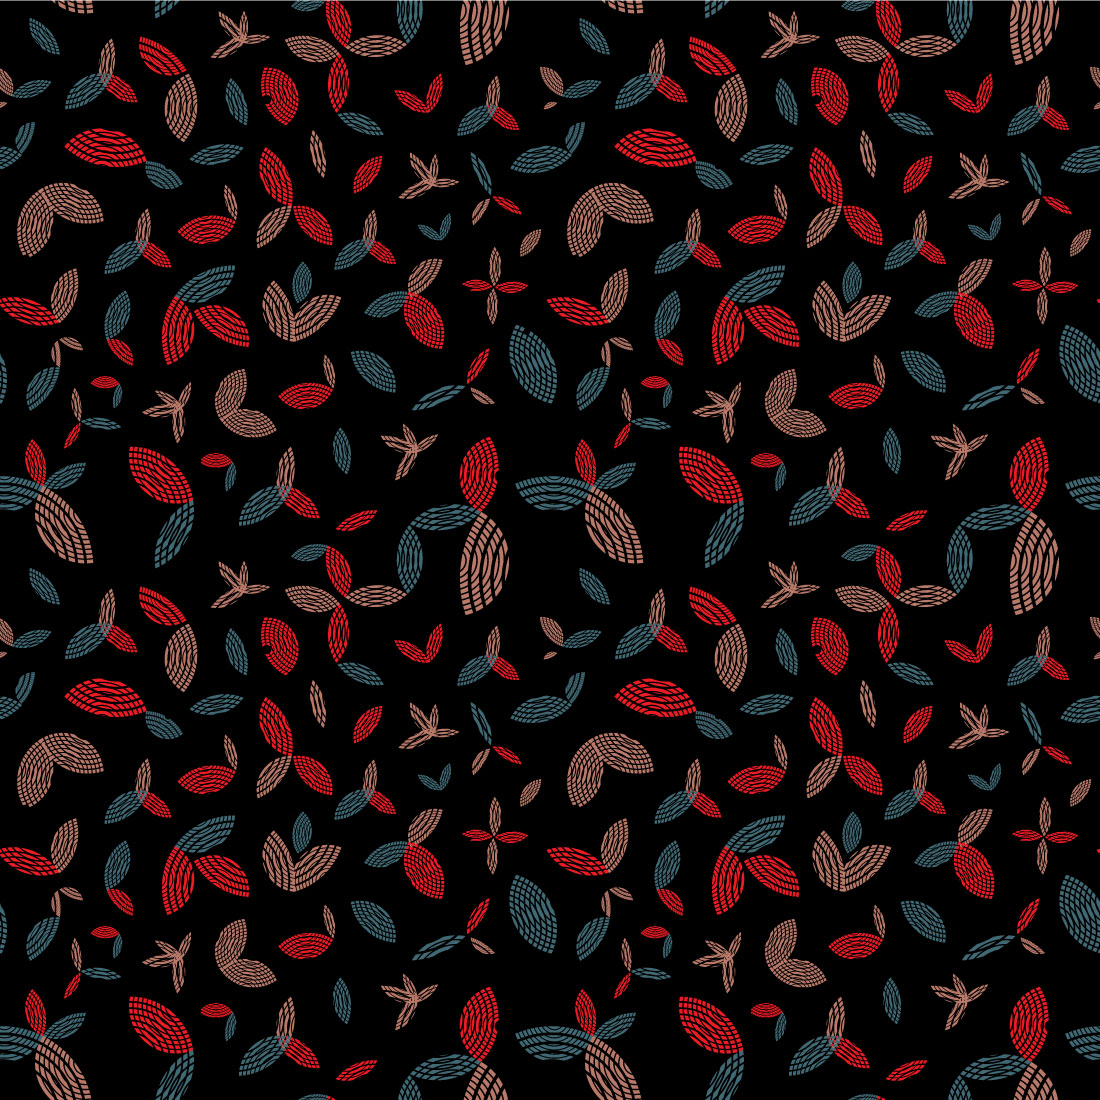 Geometric Leaf Hand Drawn Seamless Pattern Pro Vector cover image.